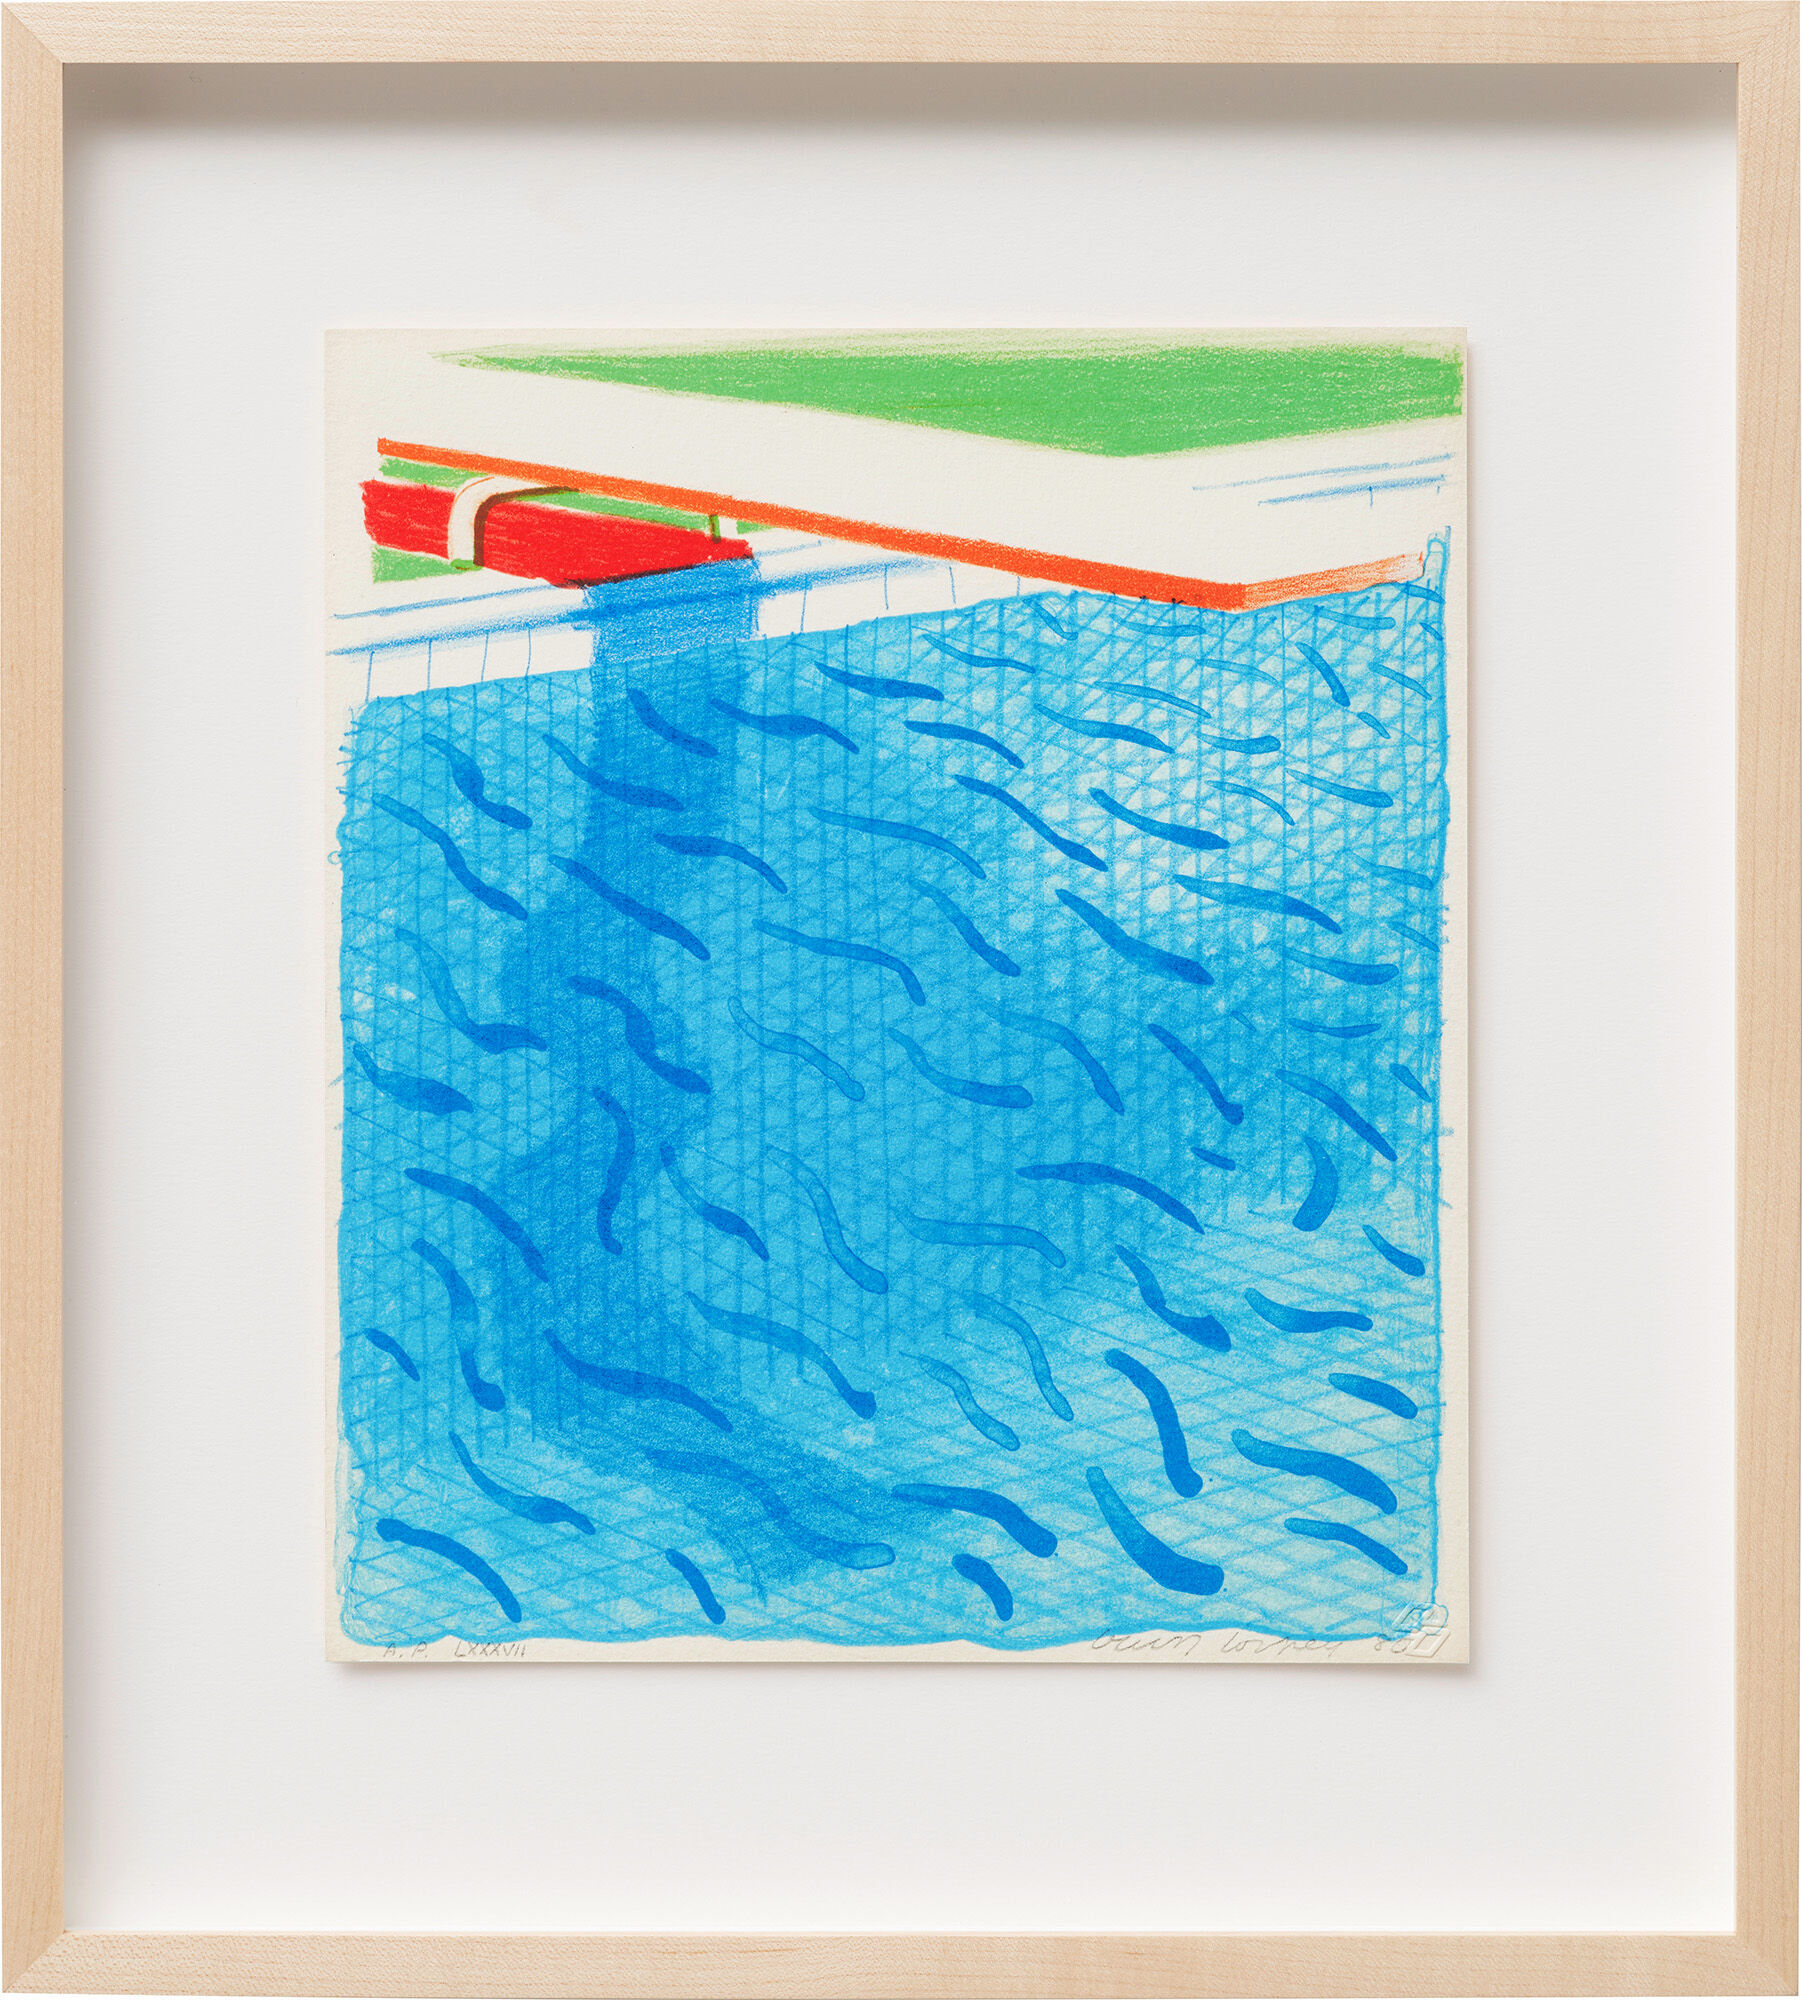 Bild "Pool made with paper and blue ink for book of paper pools" (1980) von David Hockney